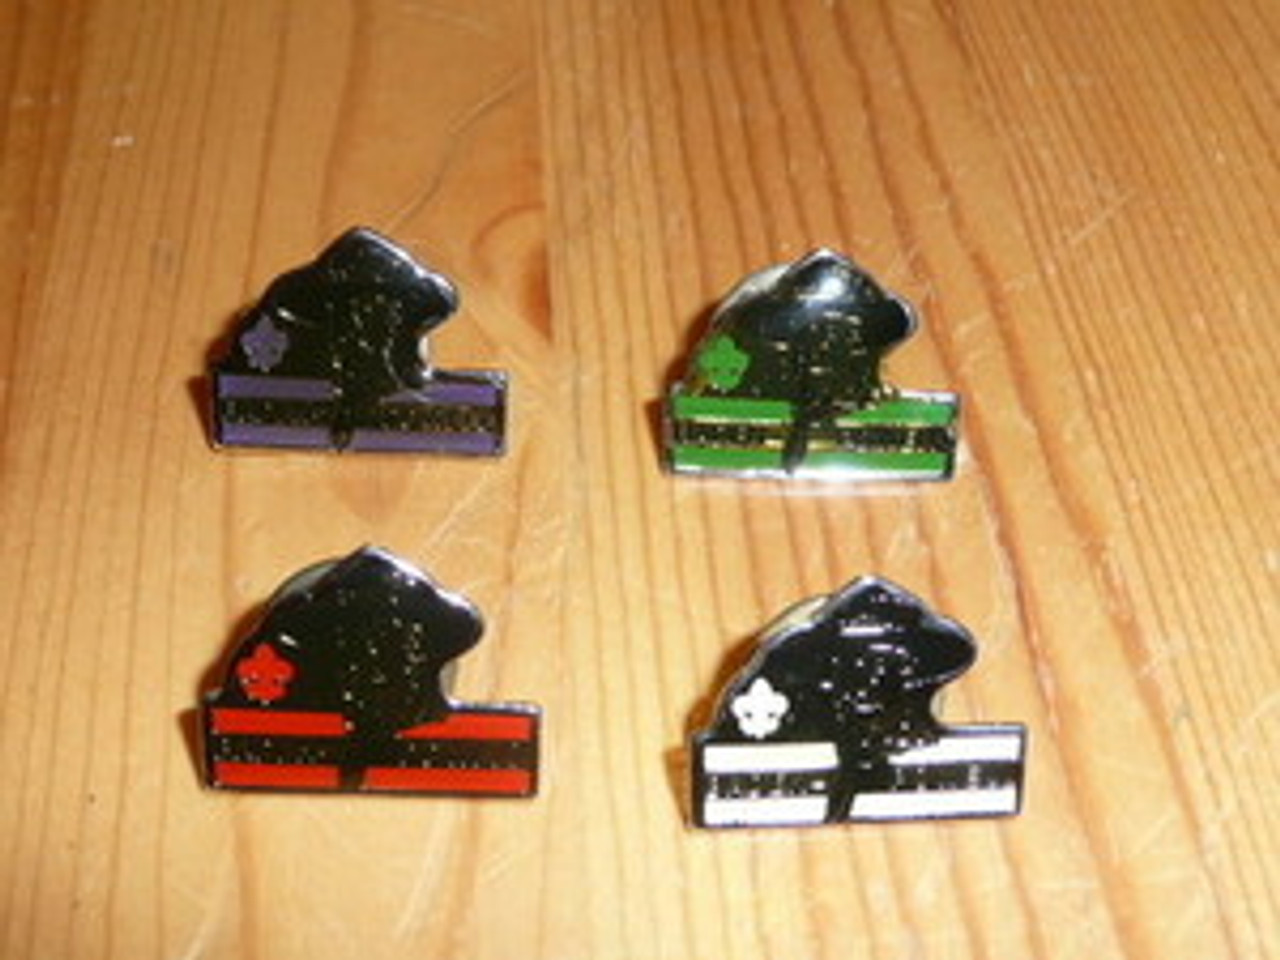 4 Baden Powell Bust Pins each in a different color - Scout